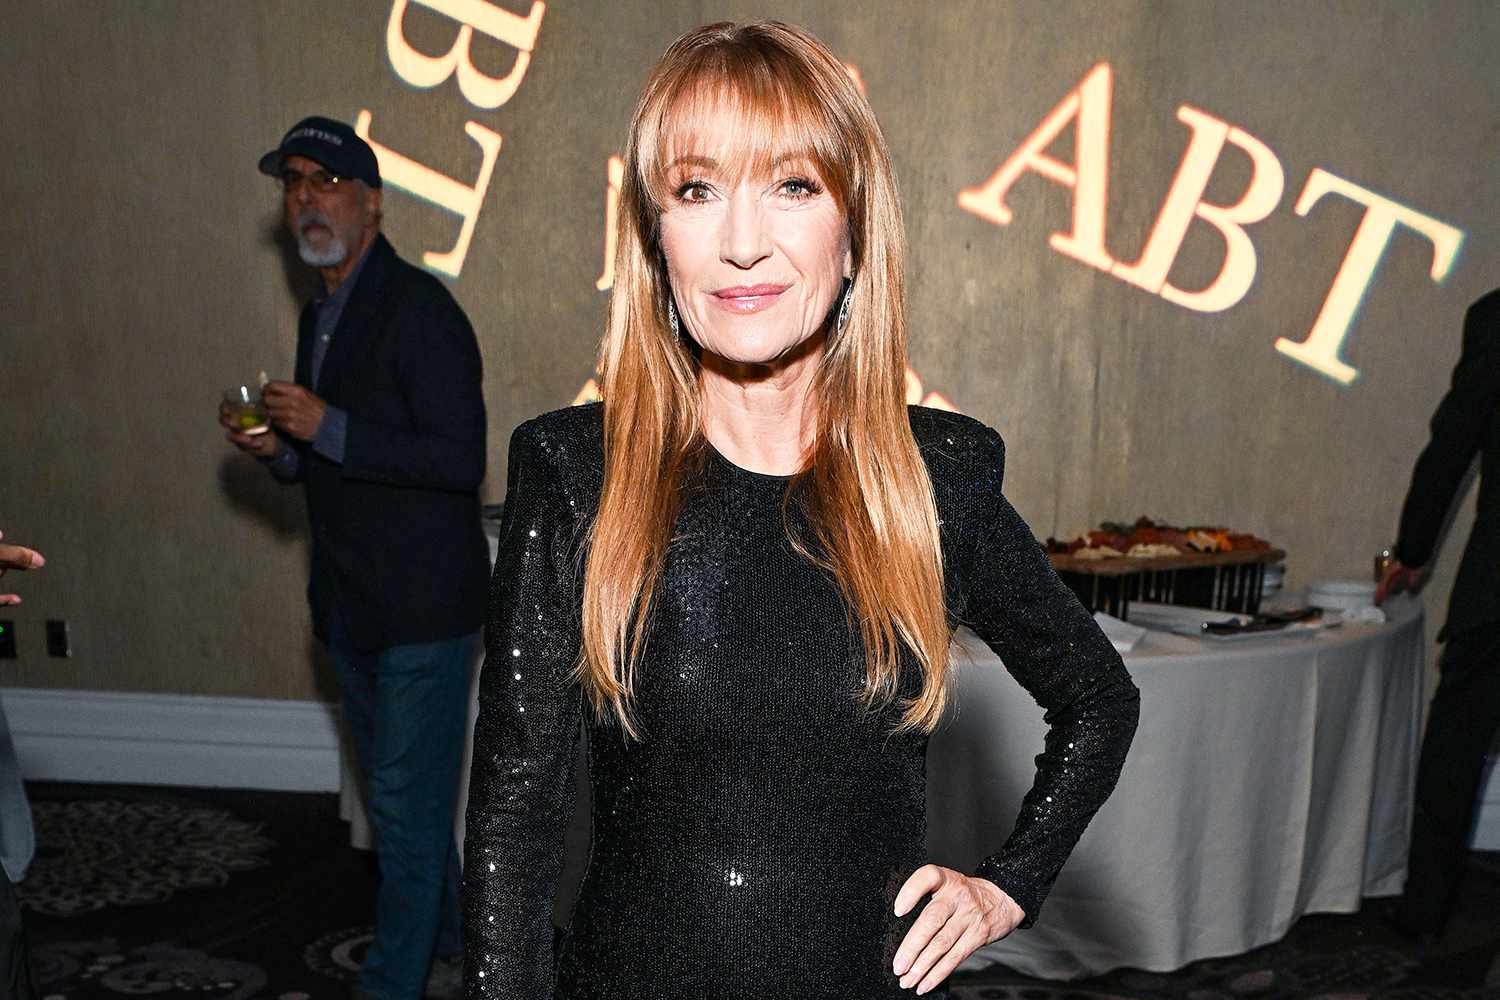 Jane Seymour Finally Sets ‘Record Straight’ About Claims She’s Had Plastic Surgery: ‘People Were Getting It Wrong’ (Exclusive)